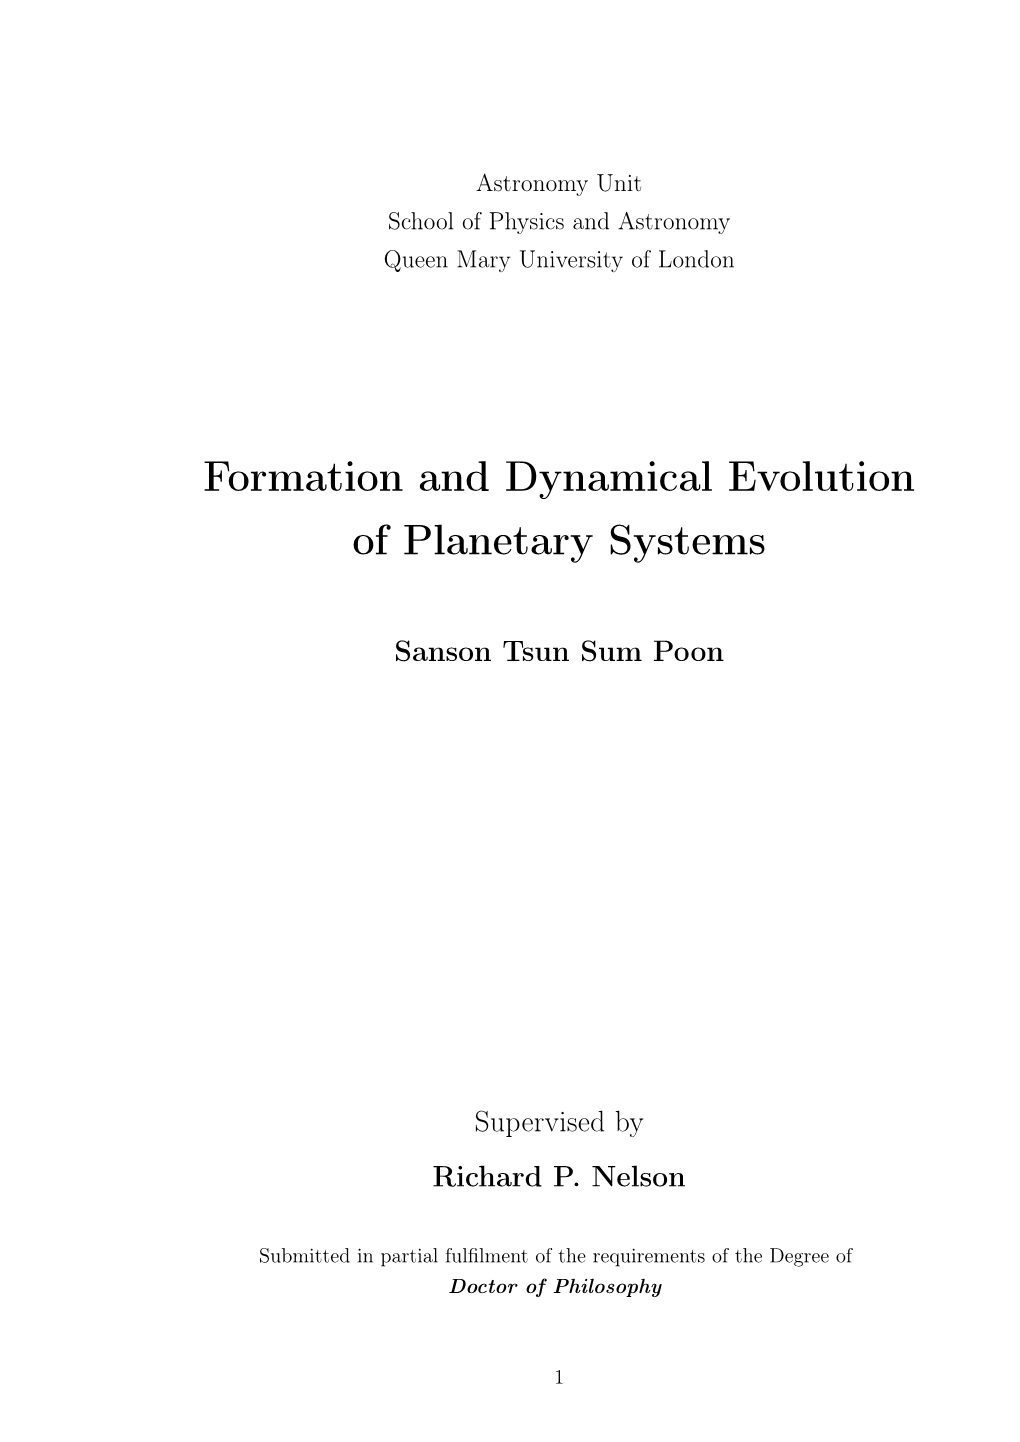 Formation and Dynamical Evolution of Planetary Systems